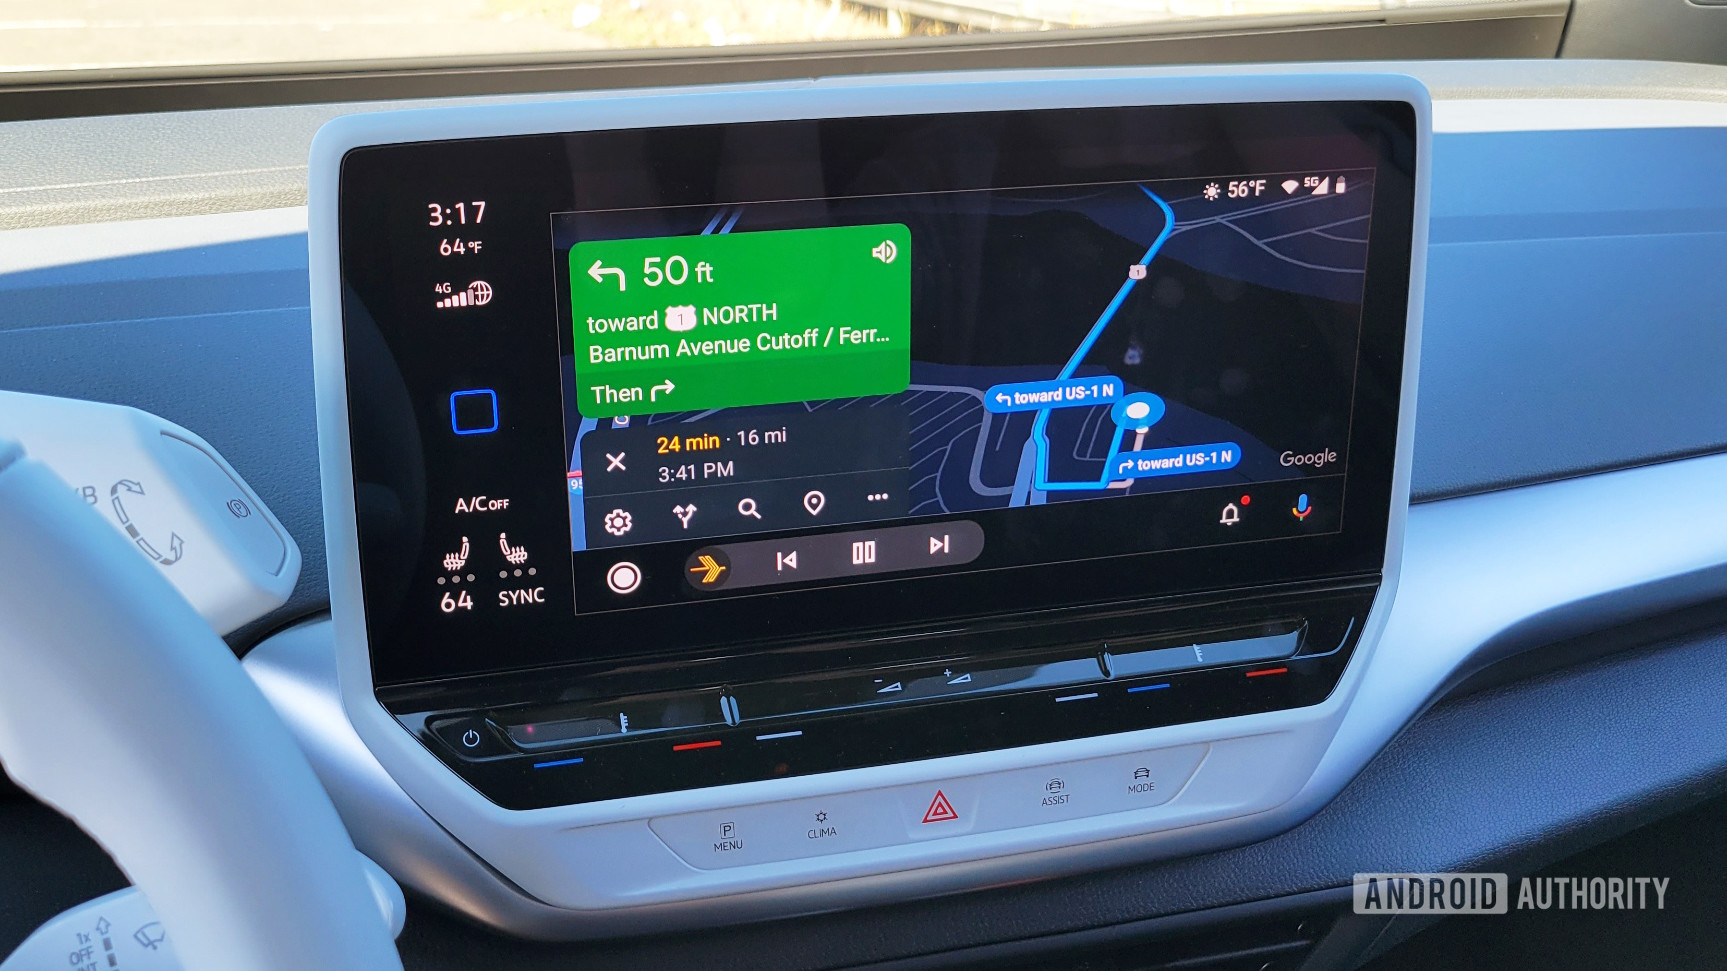 Android Auto will now let you save your parking location when you arrive at your destination